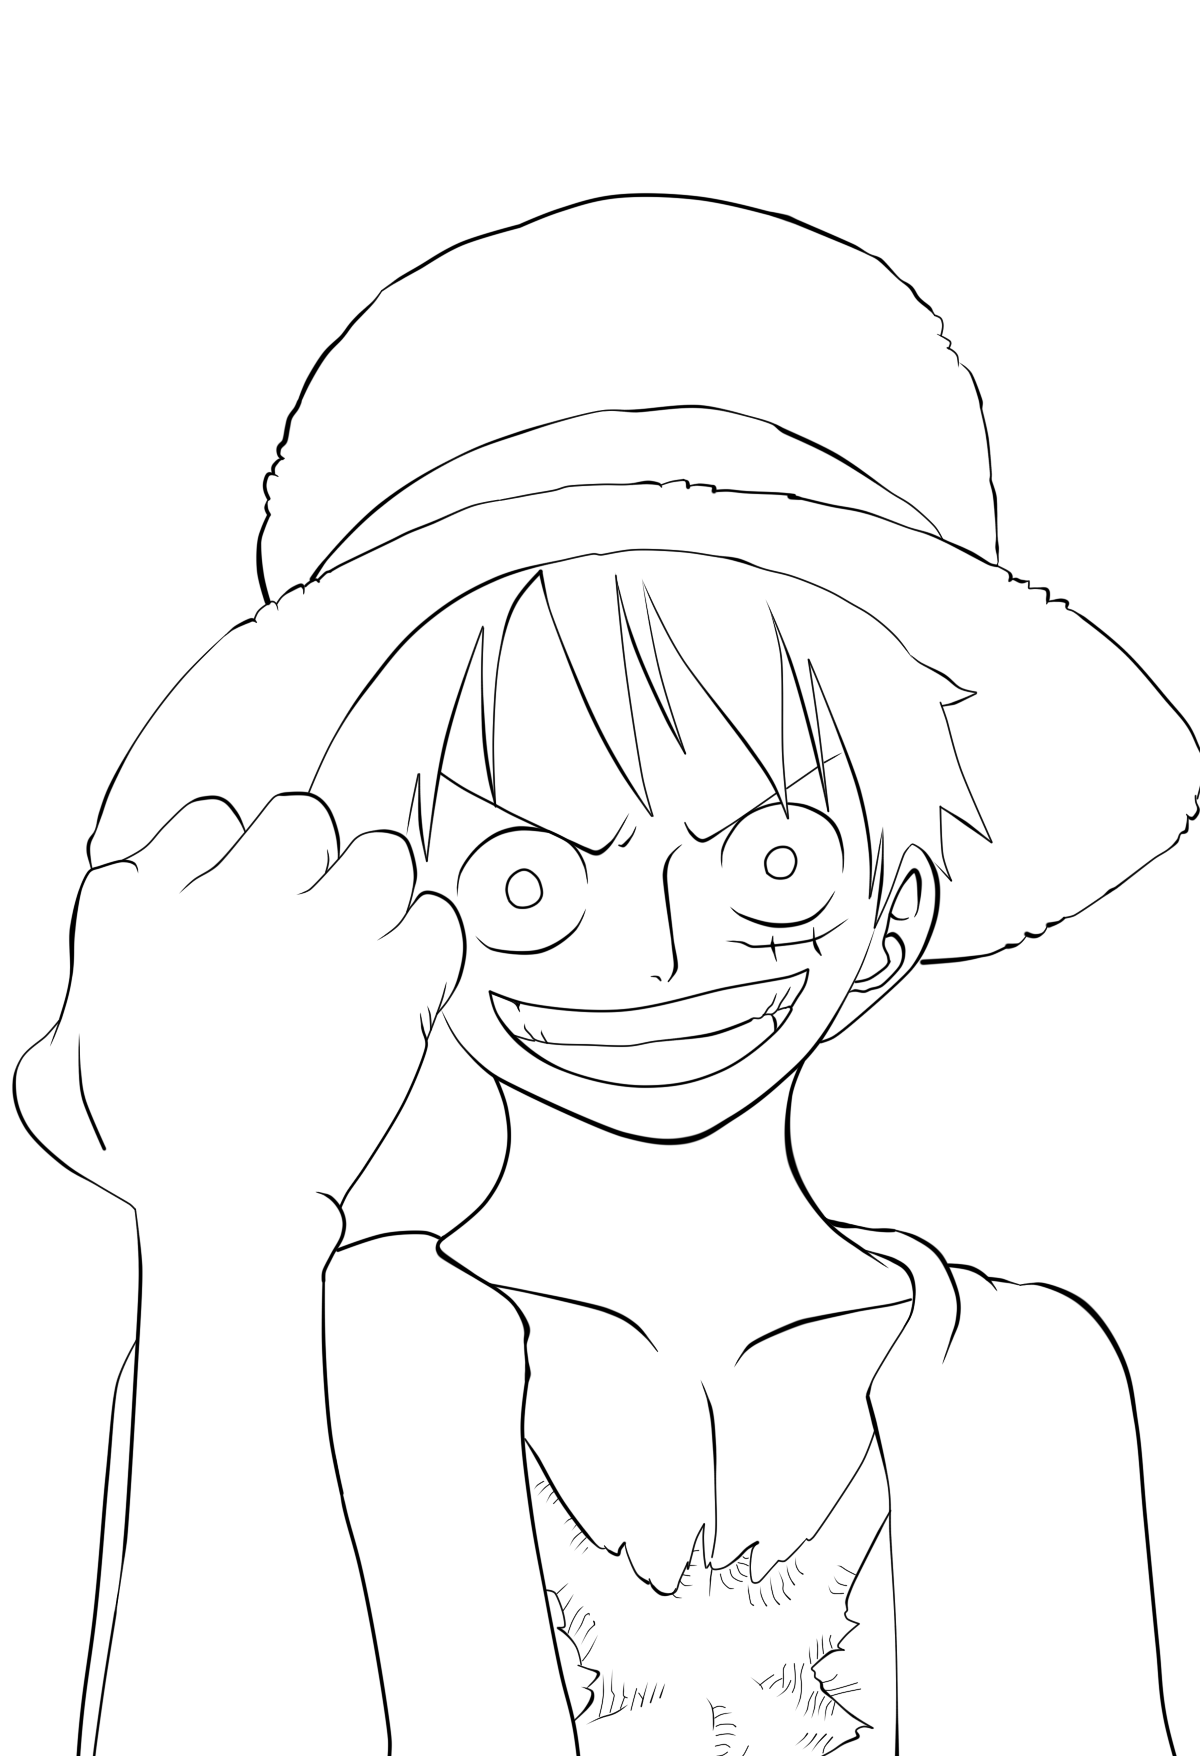 OnePiece Cover Luffy Lineart by DrEaMdSiNeR on DeviantArt